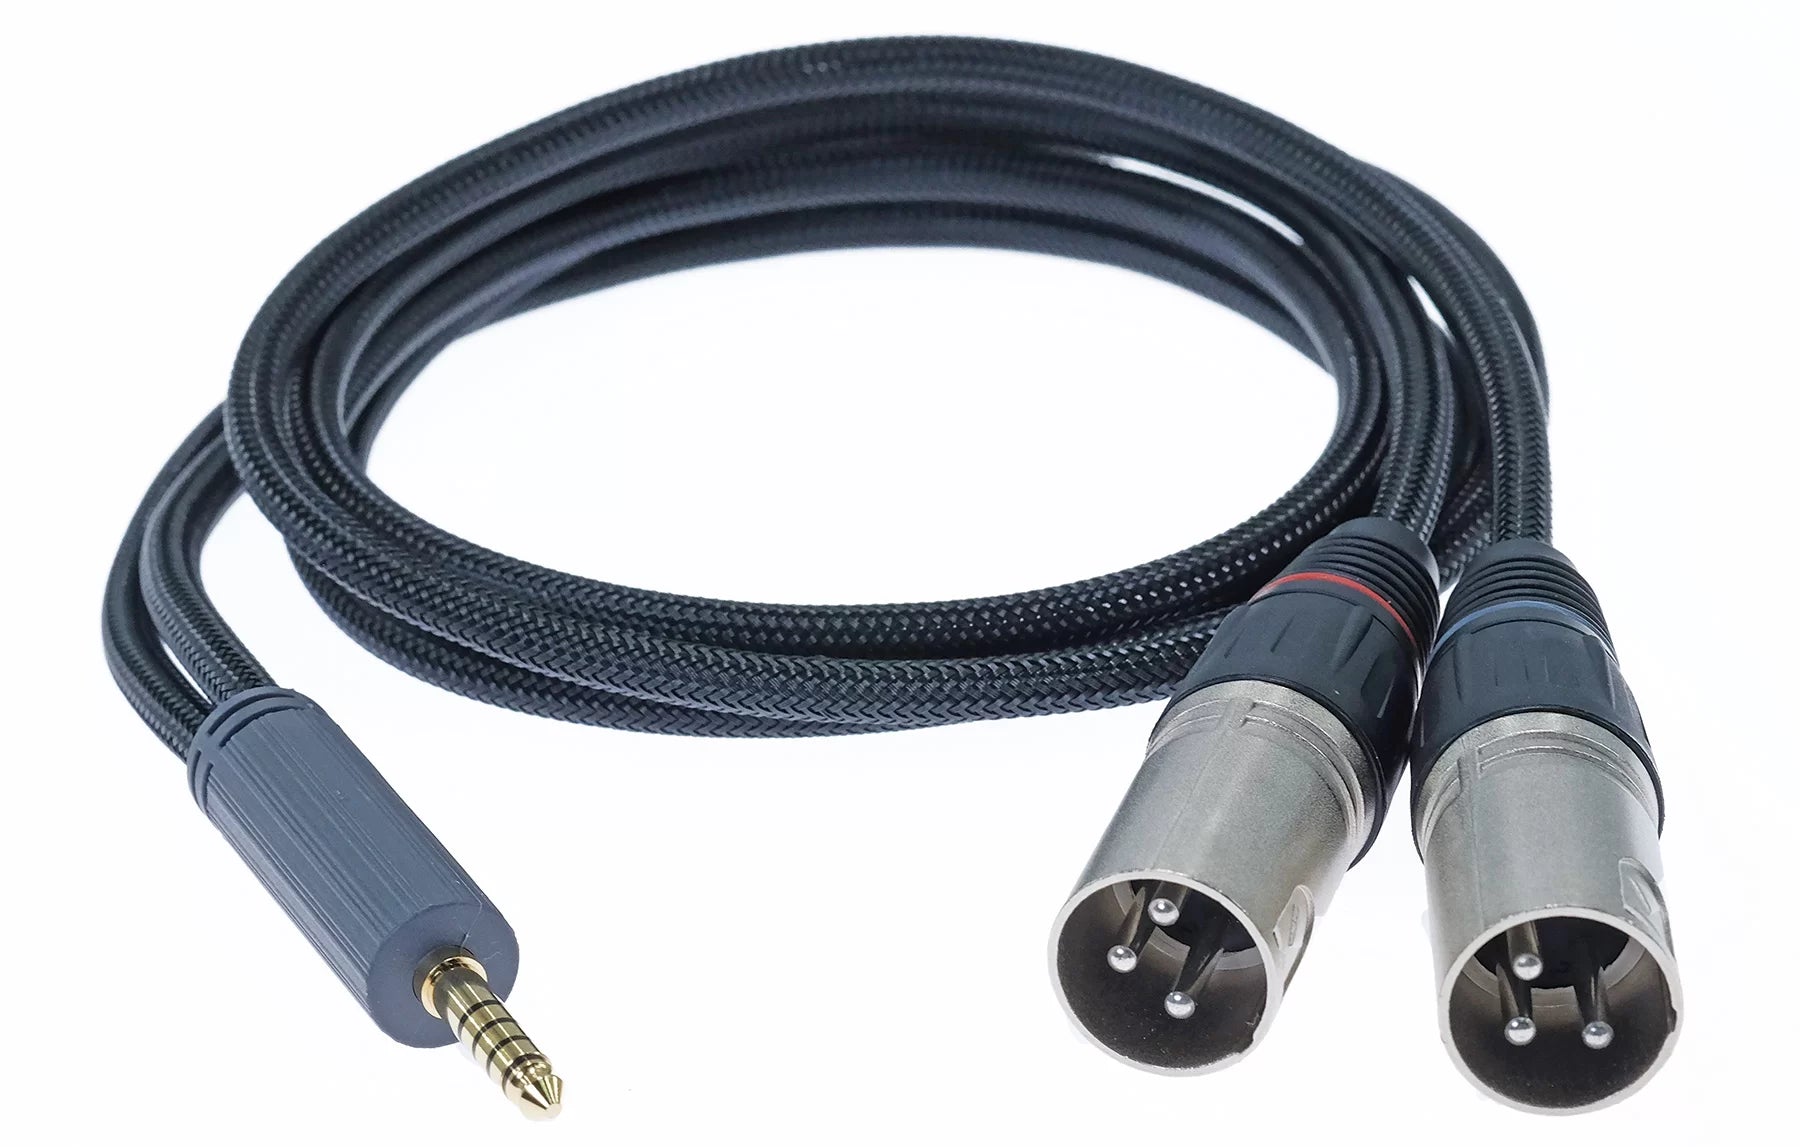 Cable 4.4 mm a XLR (Standard Edition)